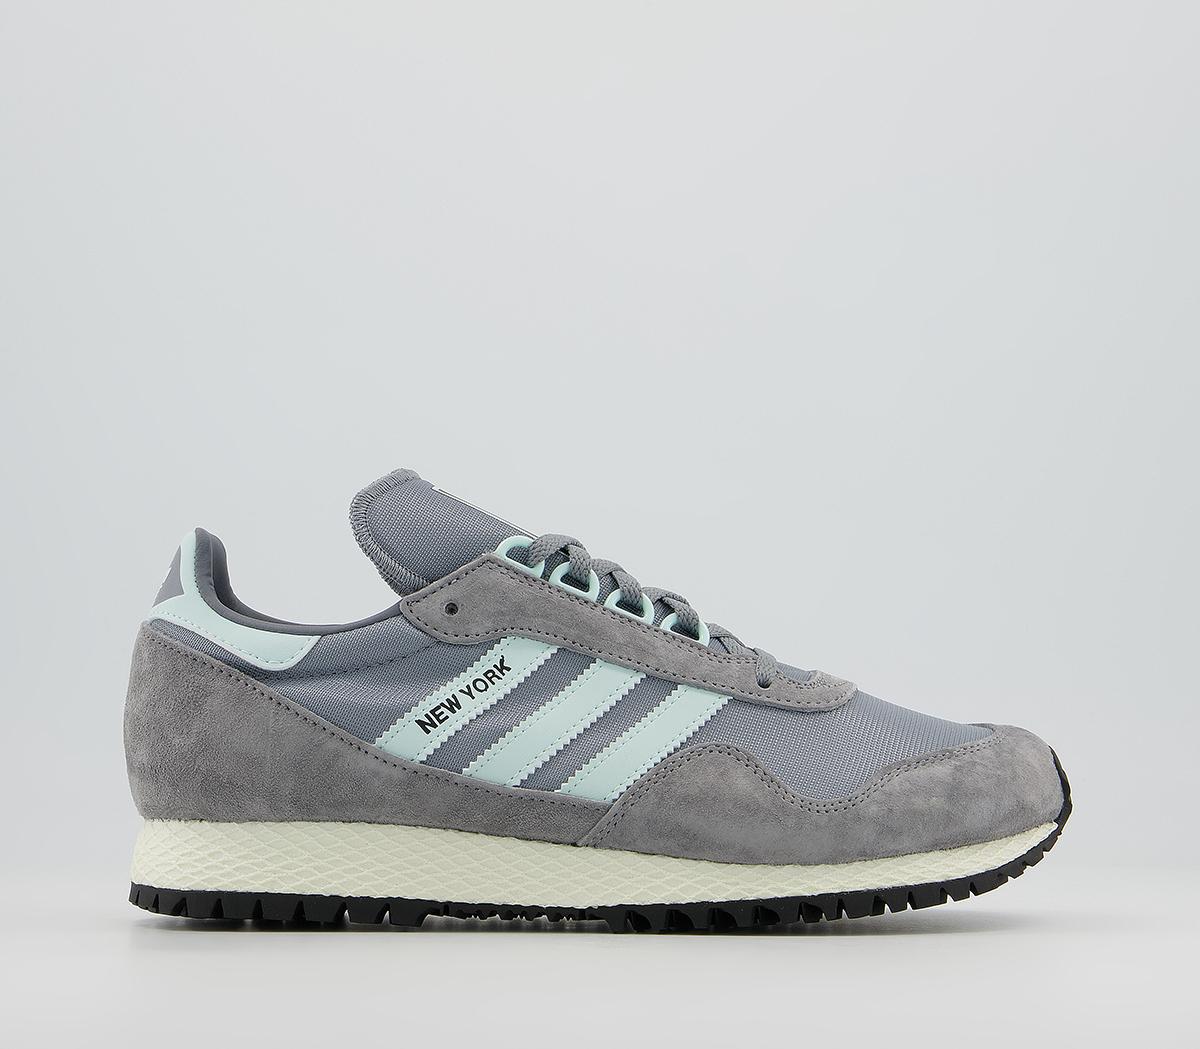 adidas New York Trainers Gray Halo Blue Black - His trainers